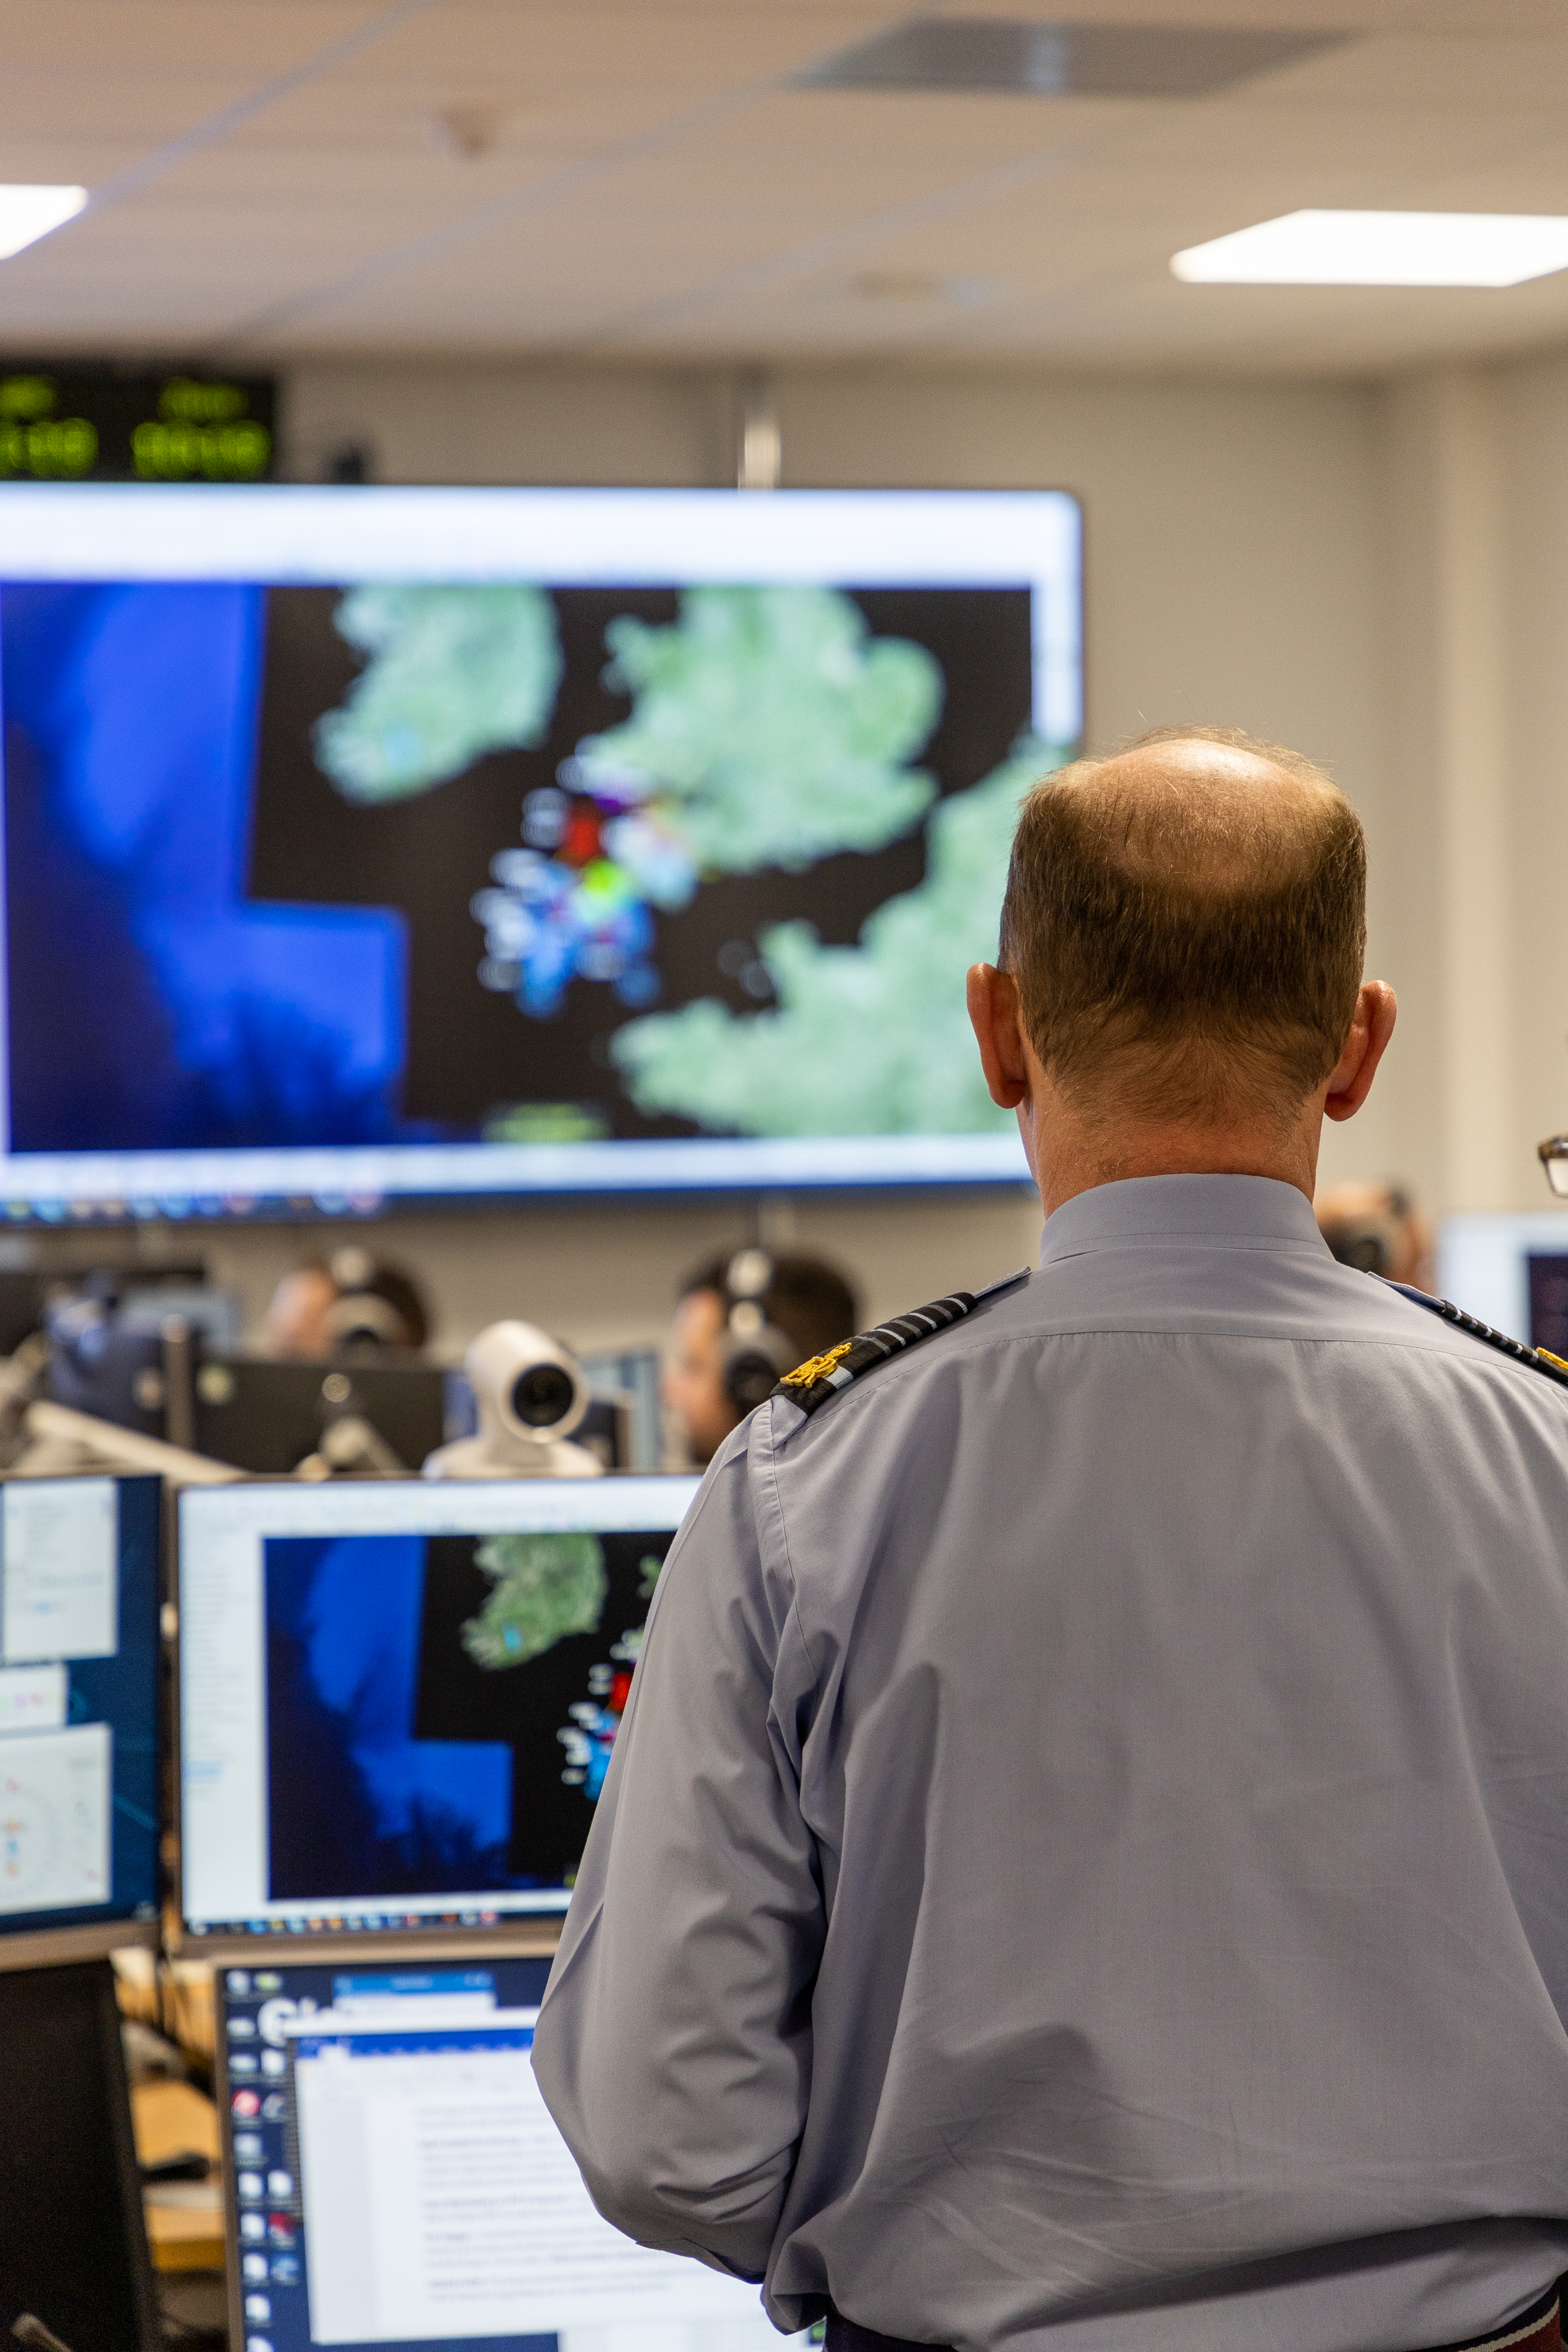 Image shows the Chief of the Air Staff looking at a large digital screen.